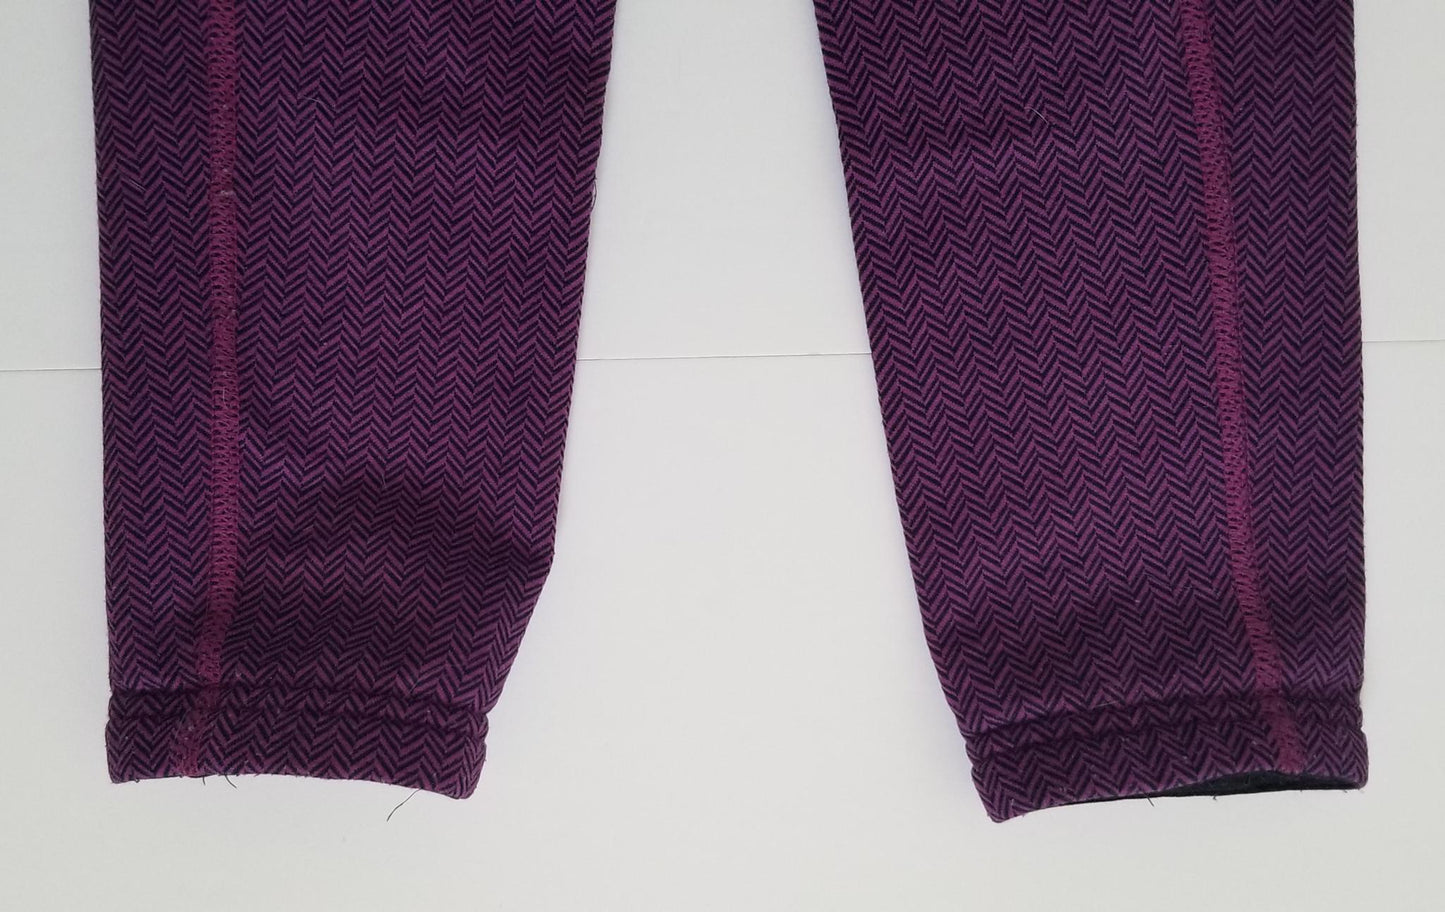 Kerrits Knee Patch Tight - Purple - Youth Large